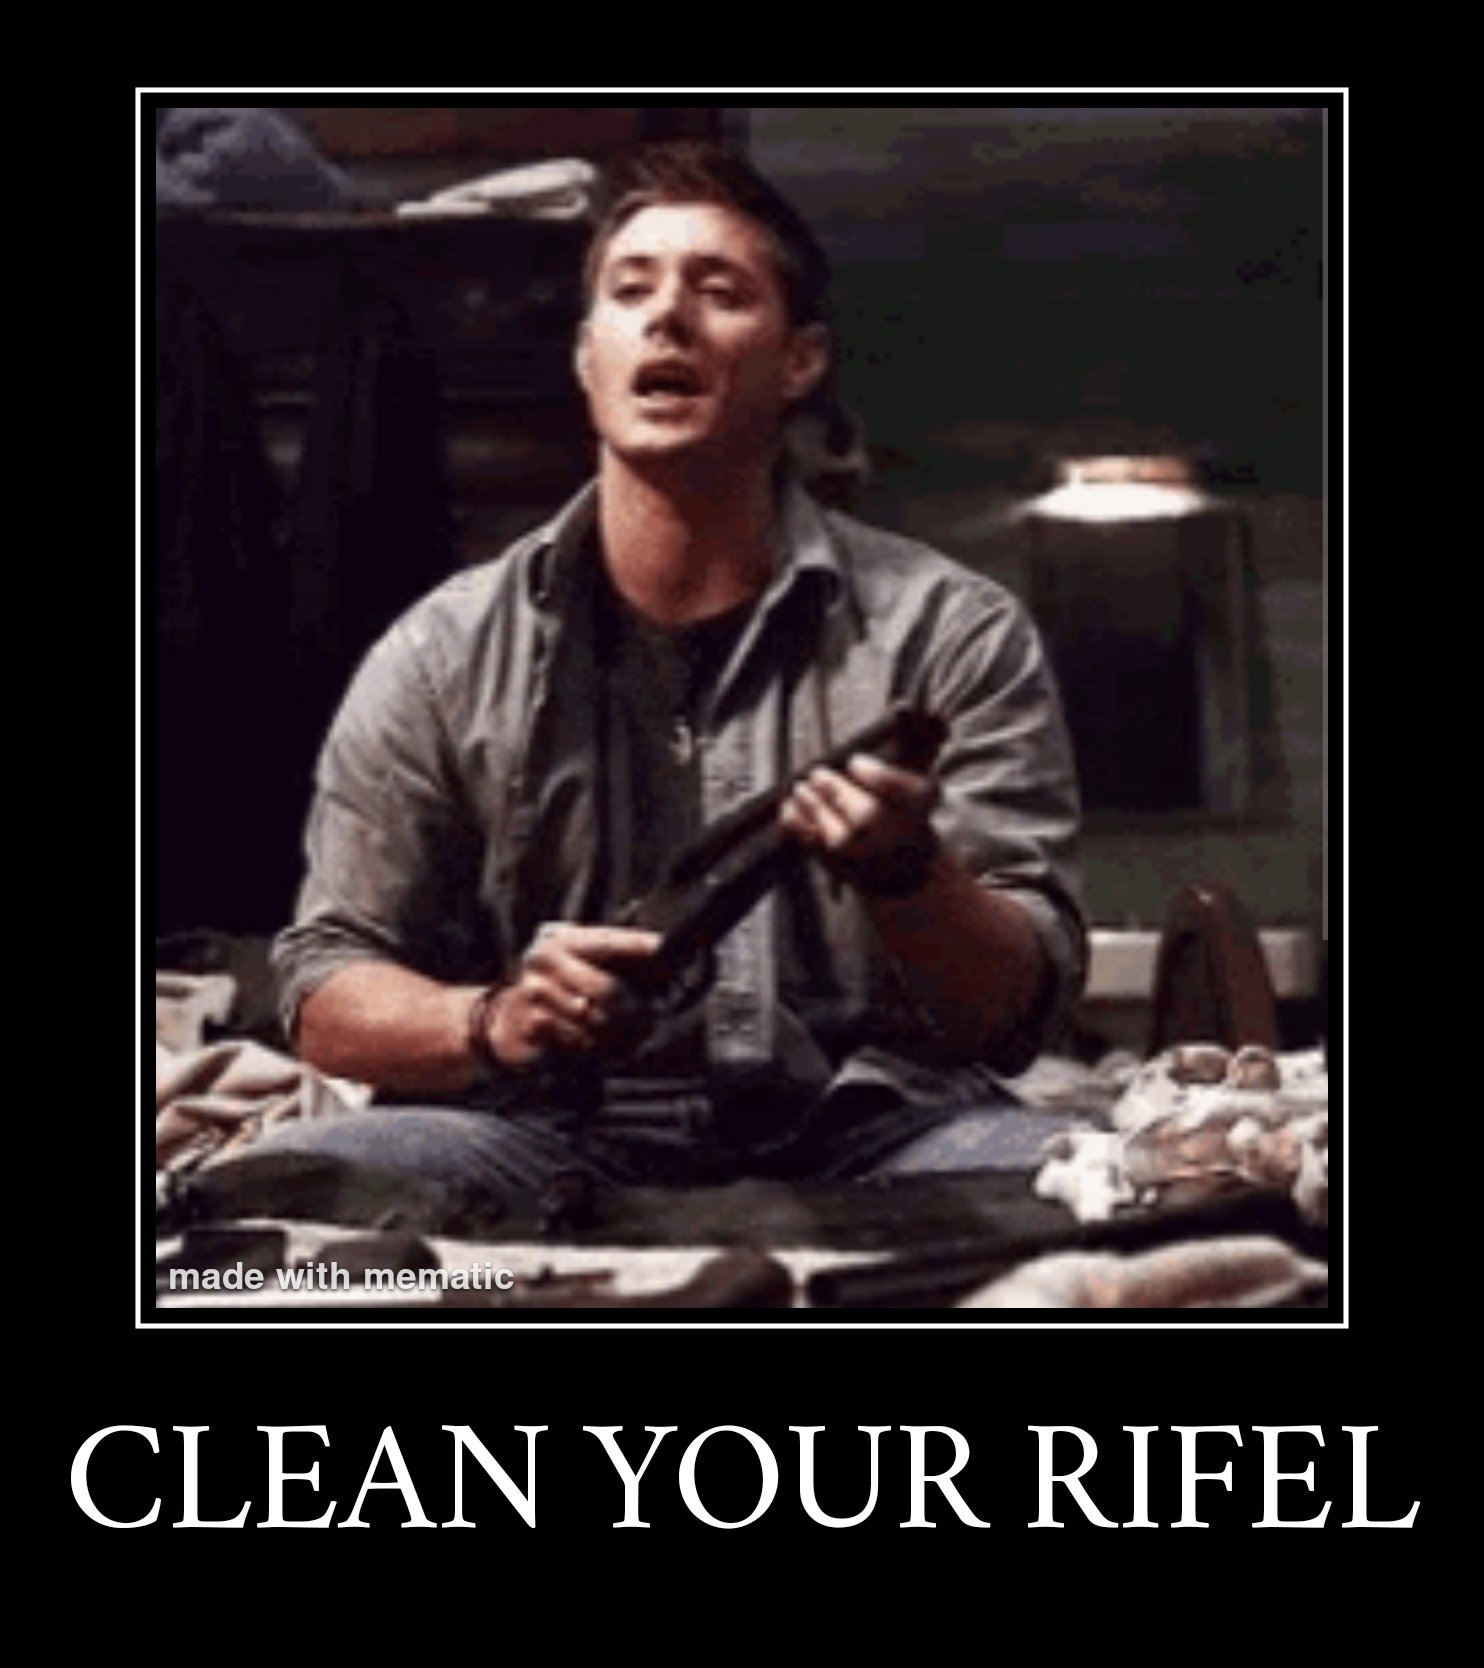 Clean your rifel